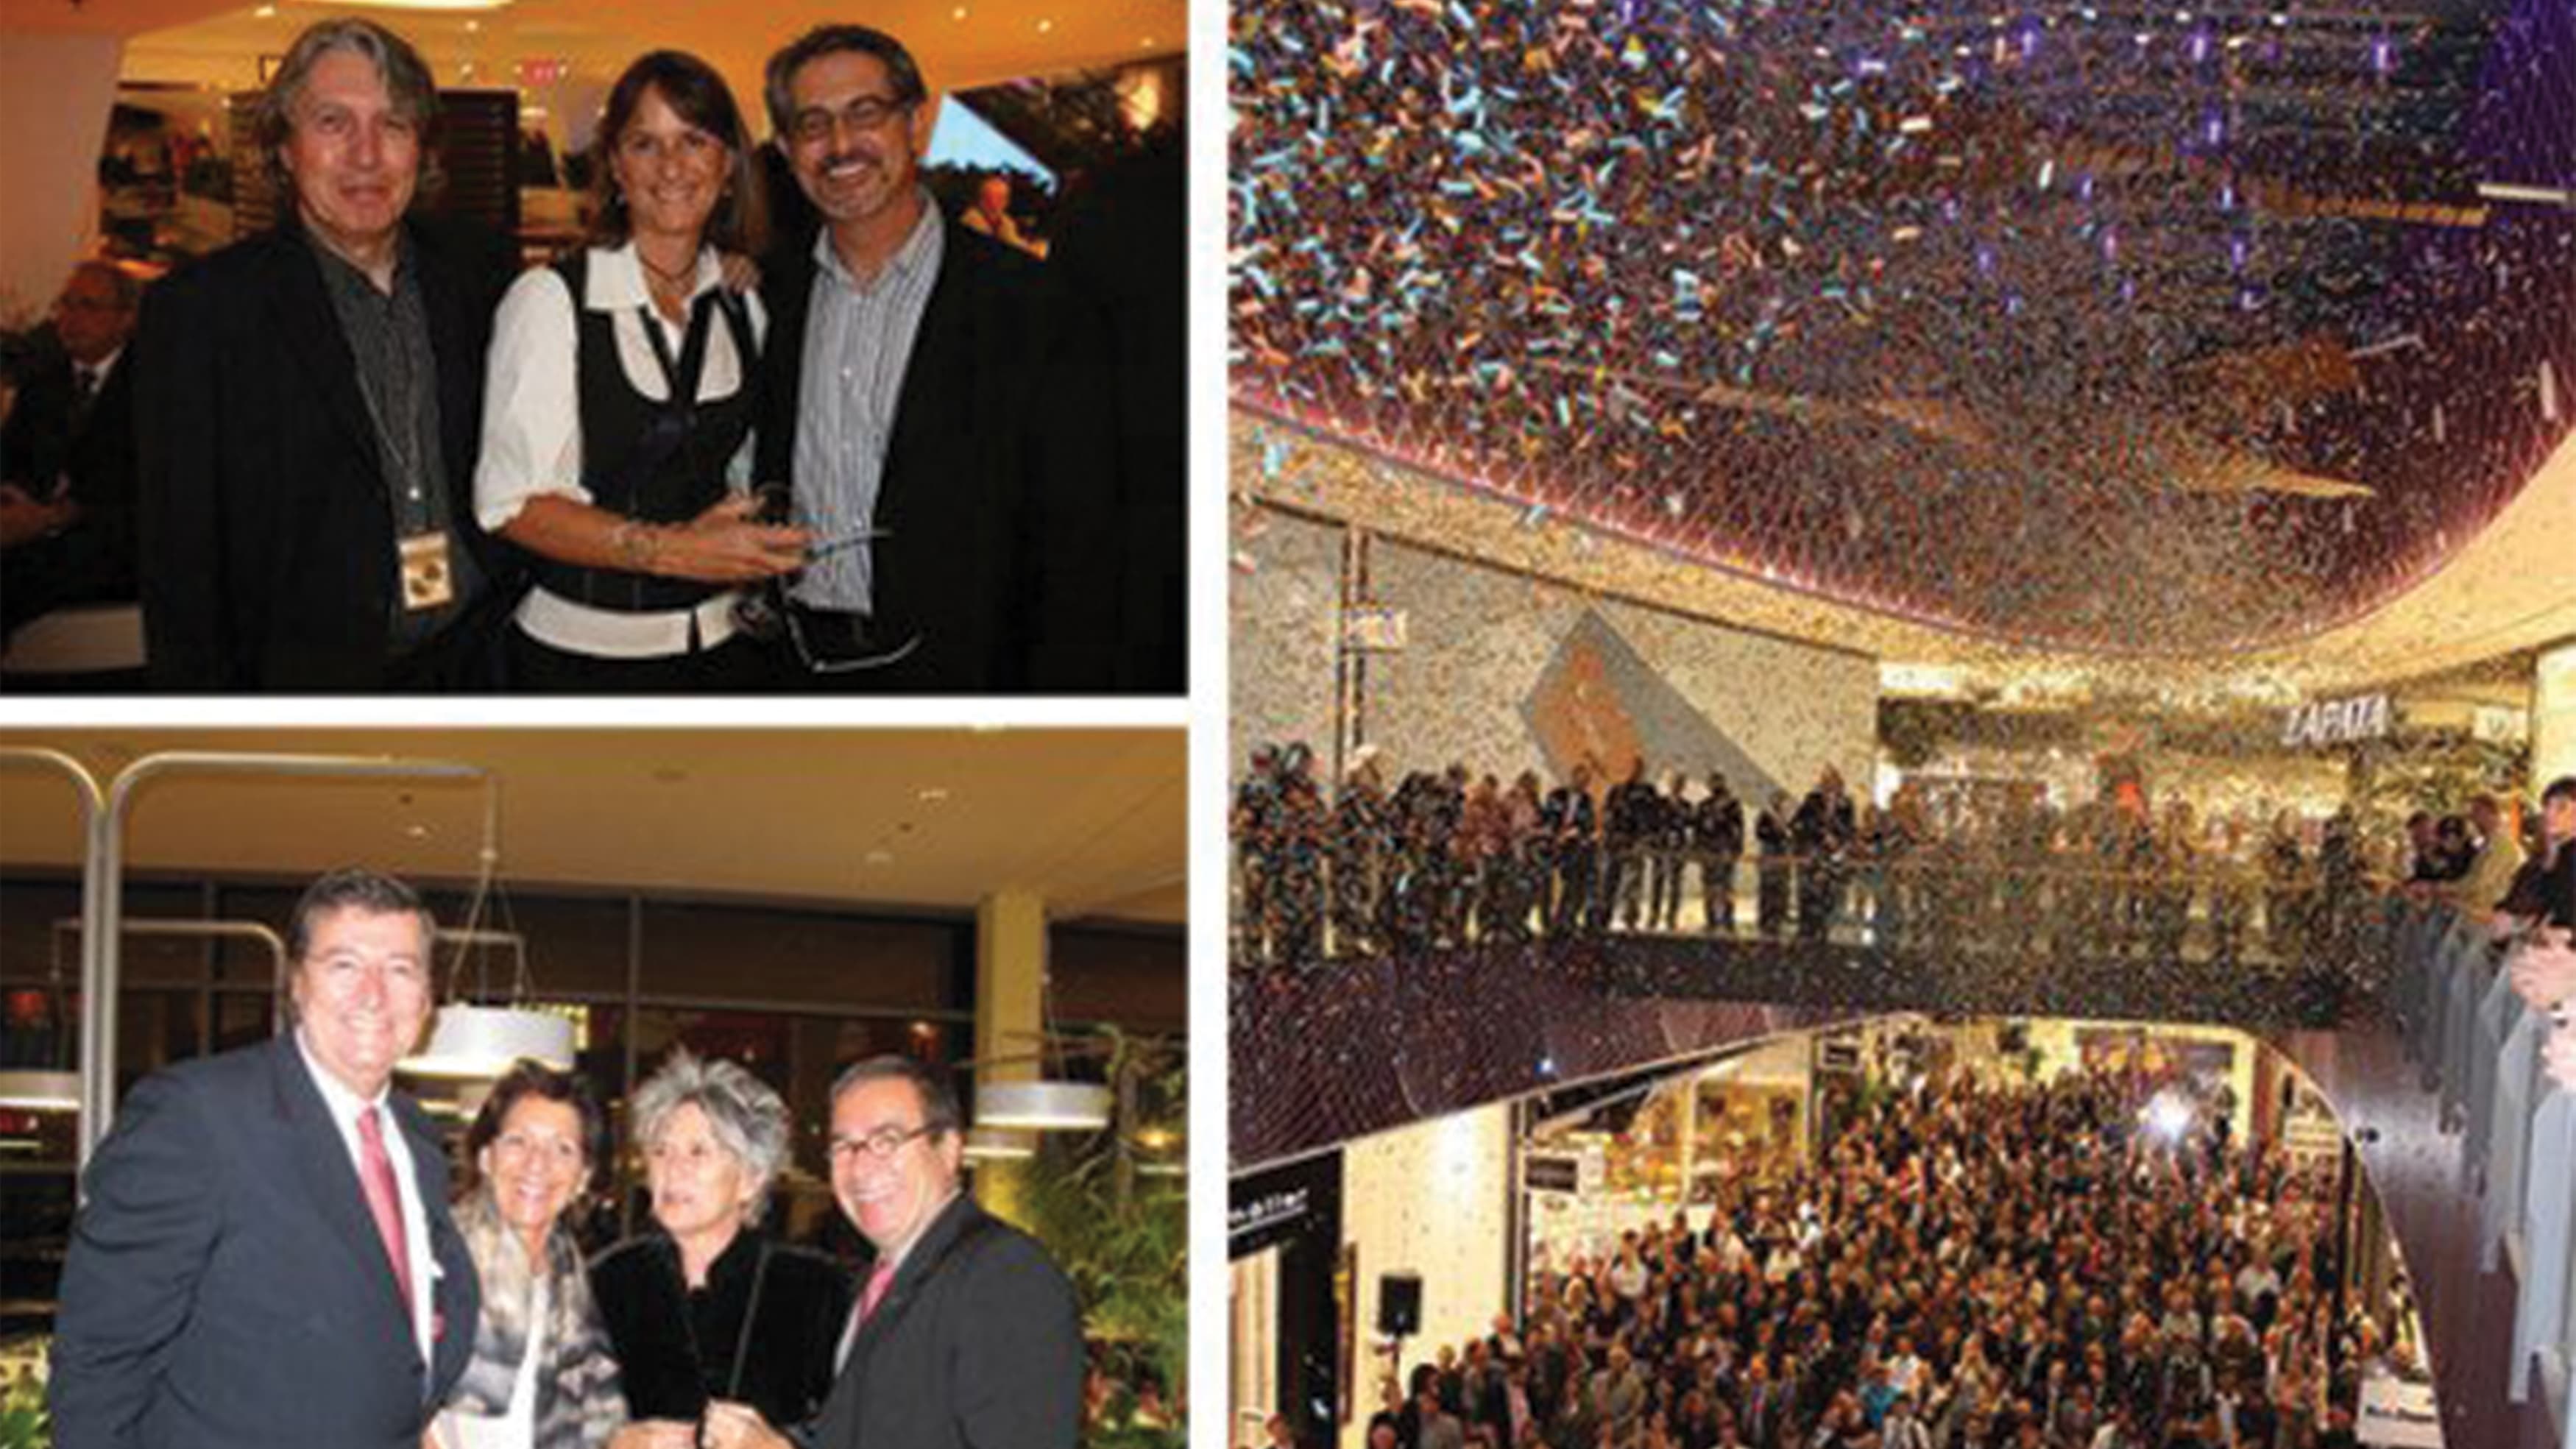 Collage of images from the opening night at Loop 5 in Germany.